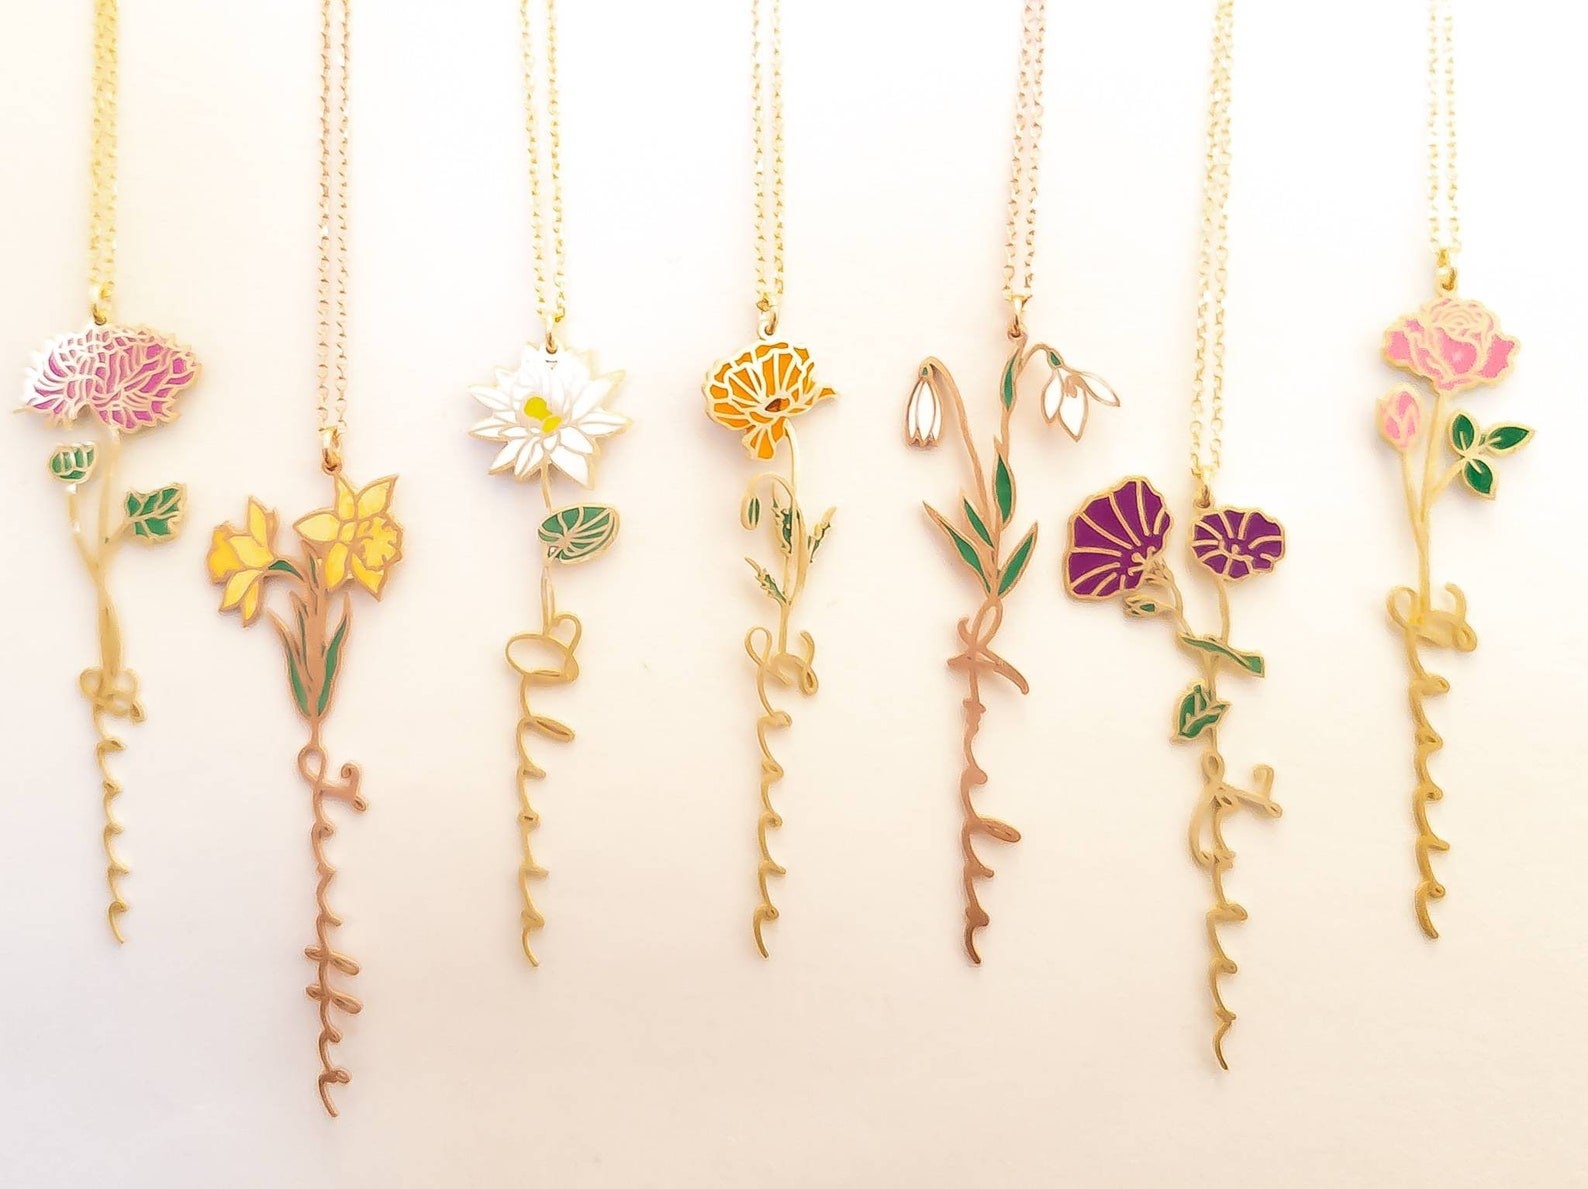 A variety of names and flower design necklaces